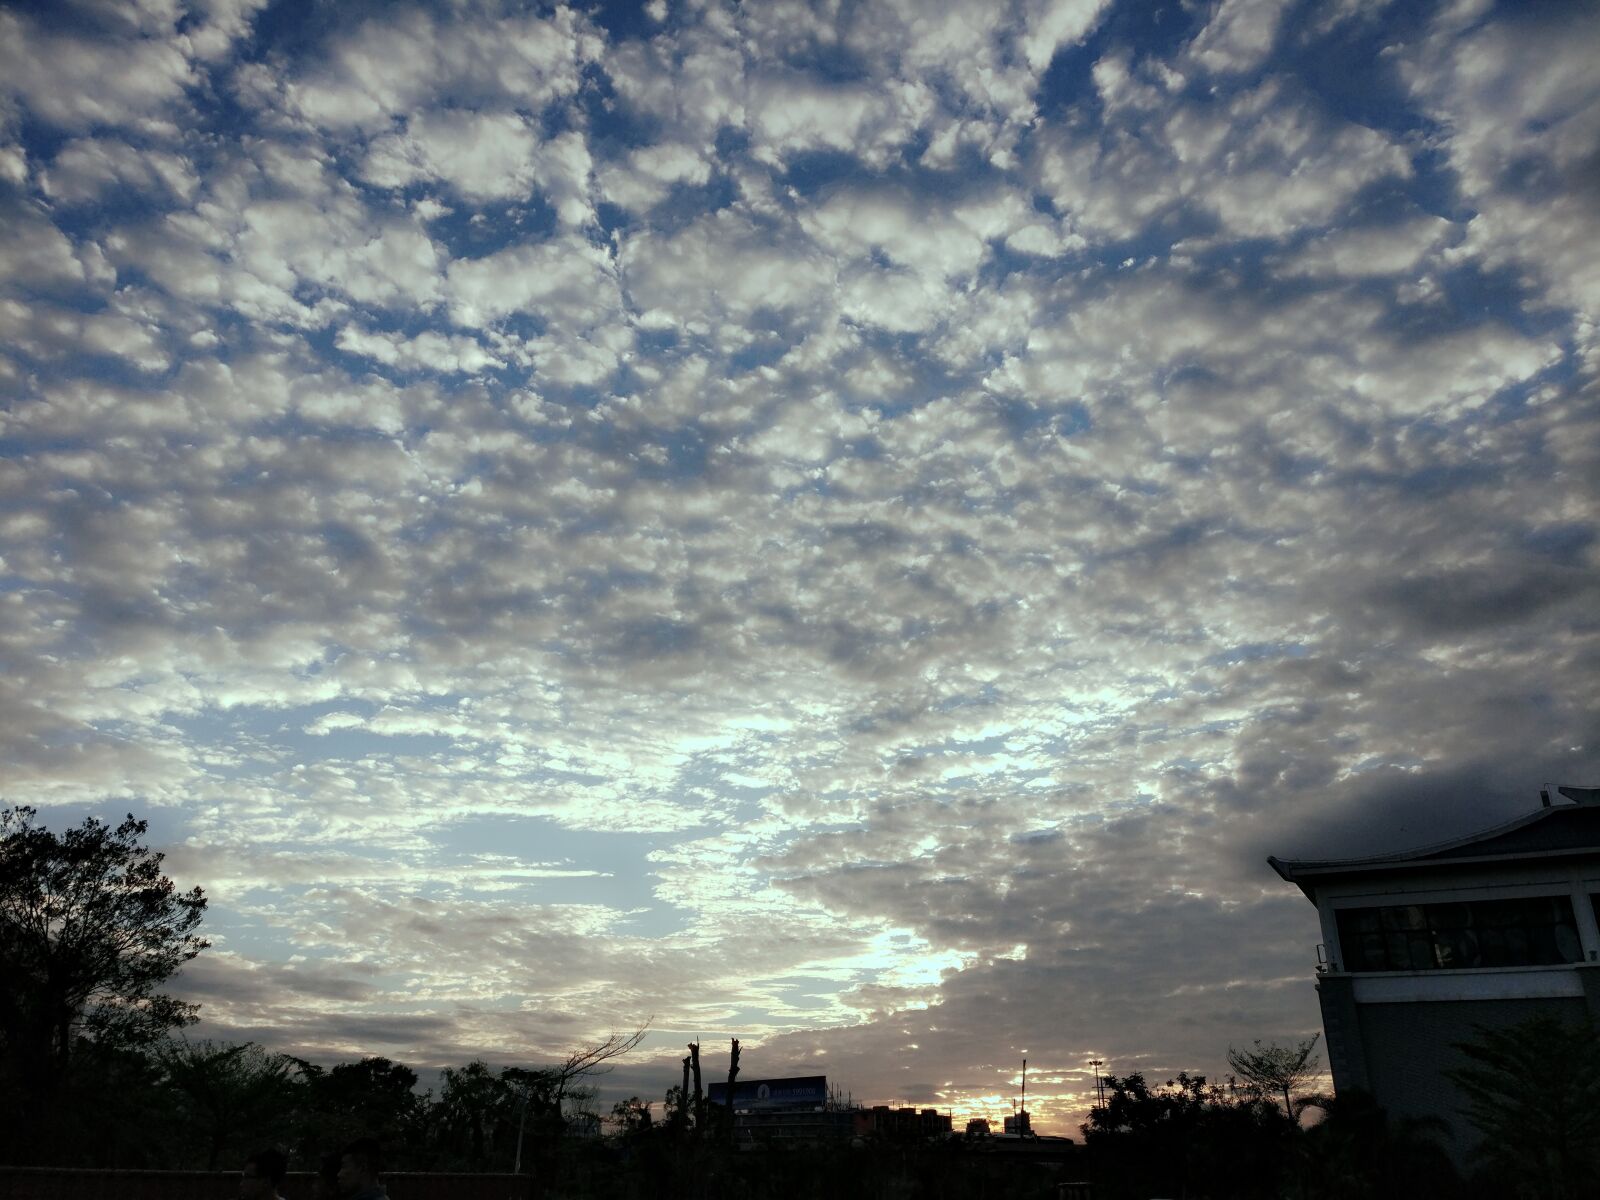 OnePlus A3000 sample photo. Sky, cloud, humanities photography